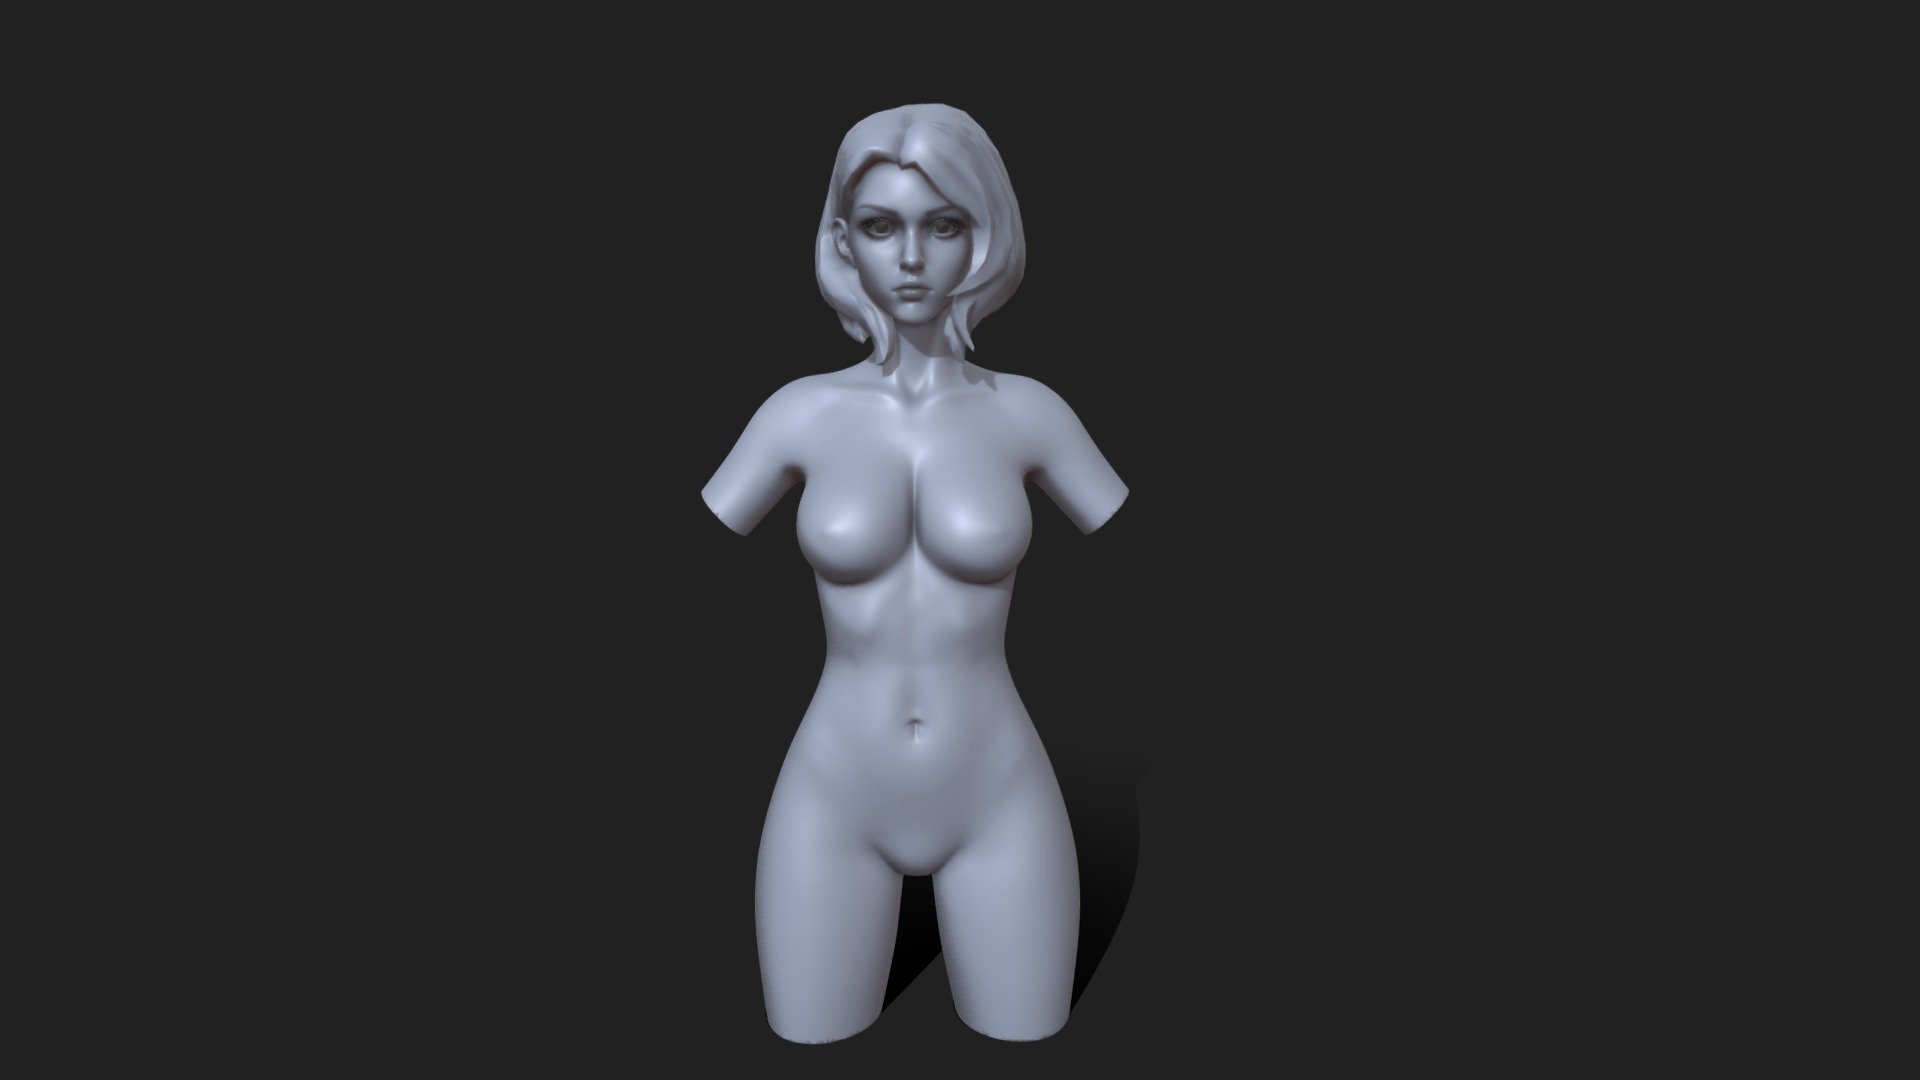 just a girl torso i practiced hope it helps you learn and grow 3d model